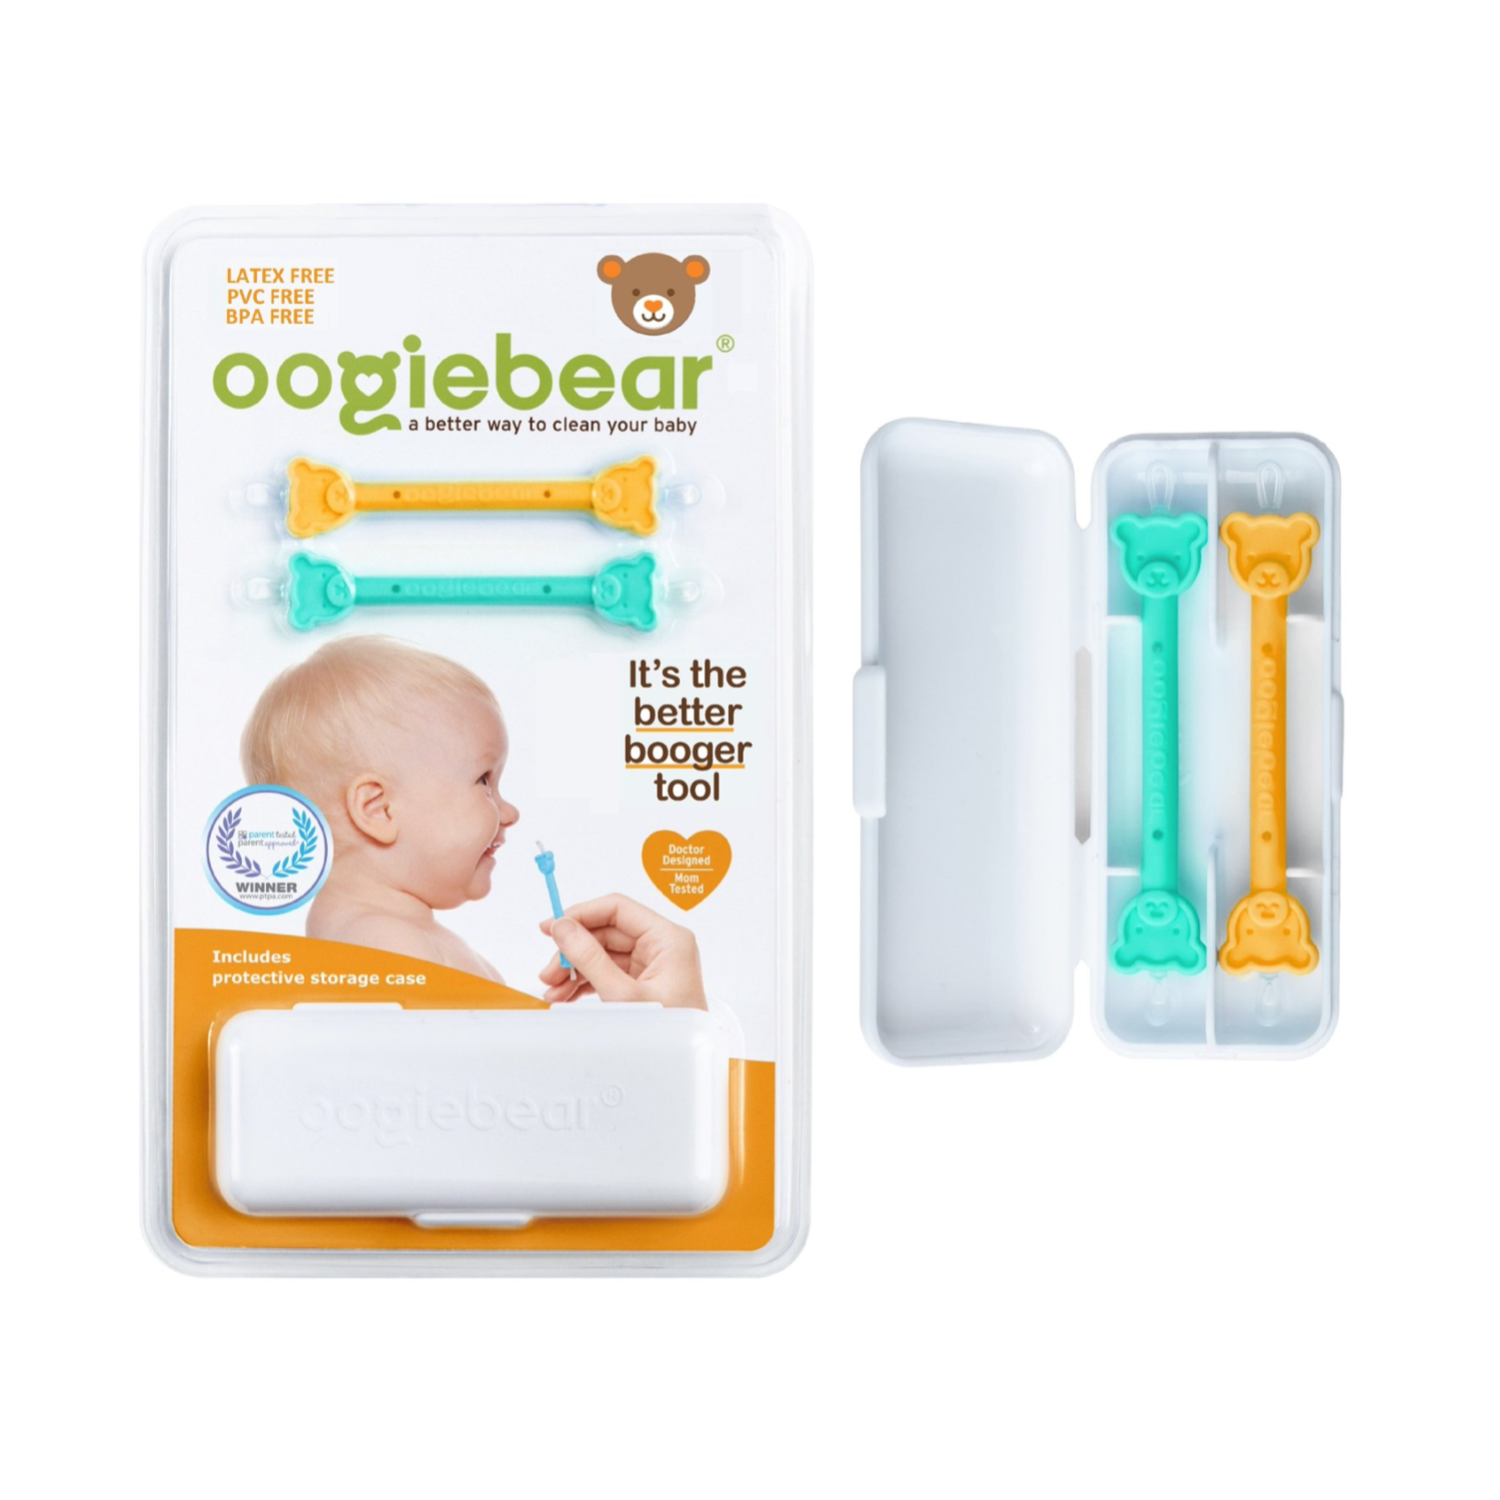 Oogiebear 2-Pack Infant Nose & Ear Cleaner with Case in Blue